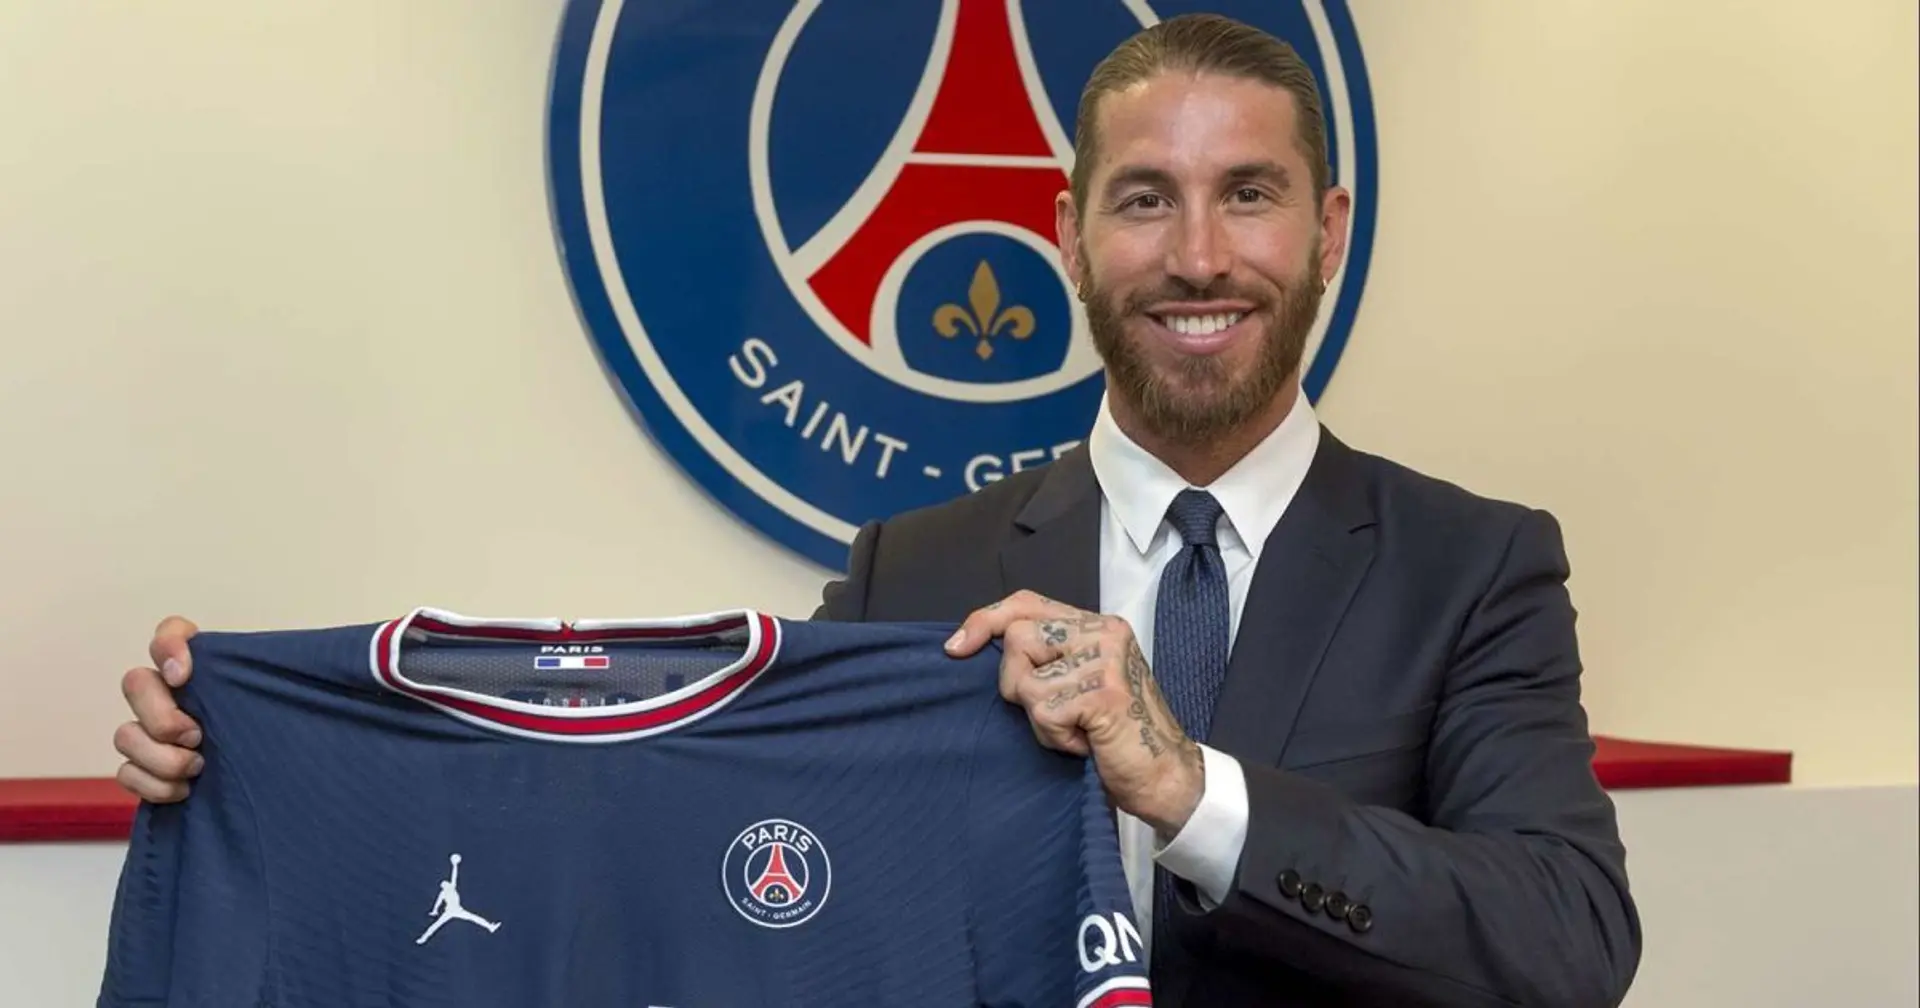 Sergio Ramos set to make his PSG debut 3 months after joining the club